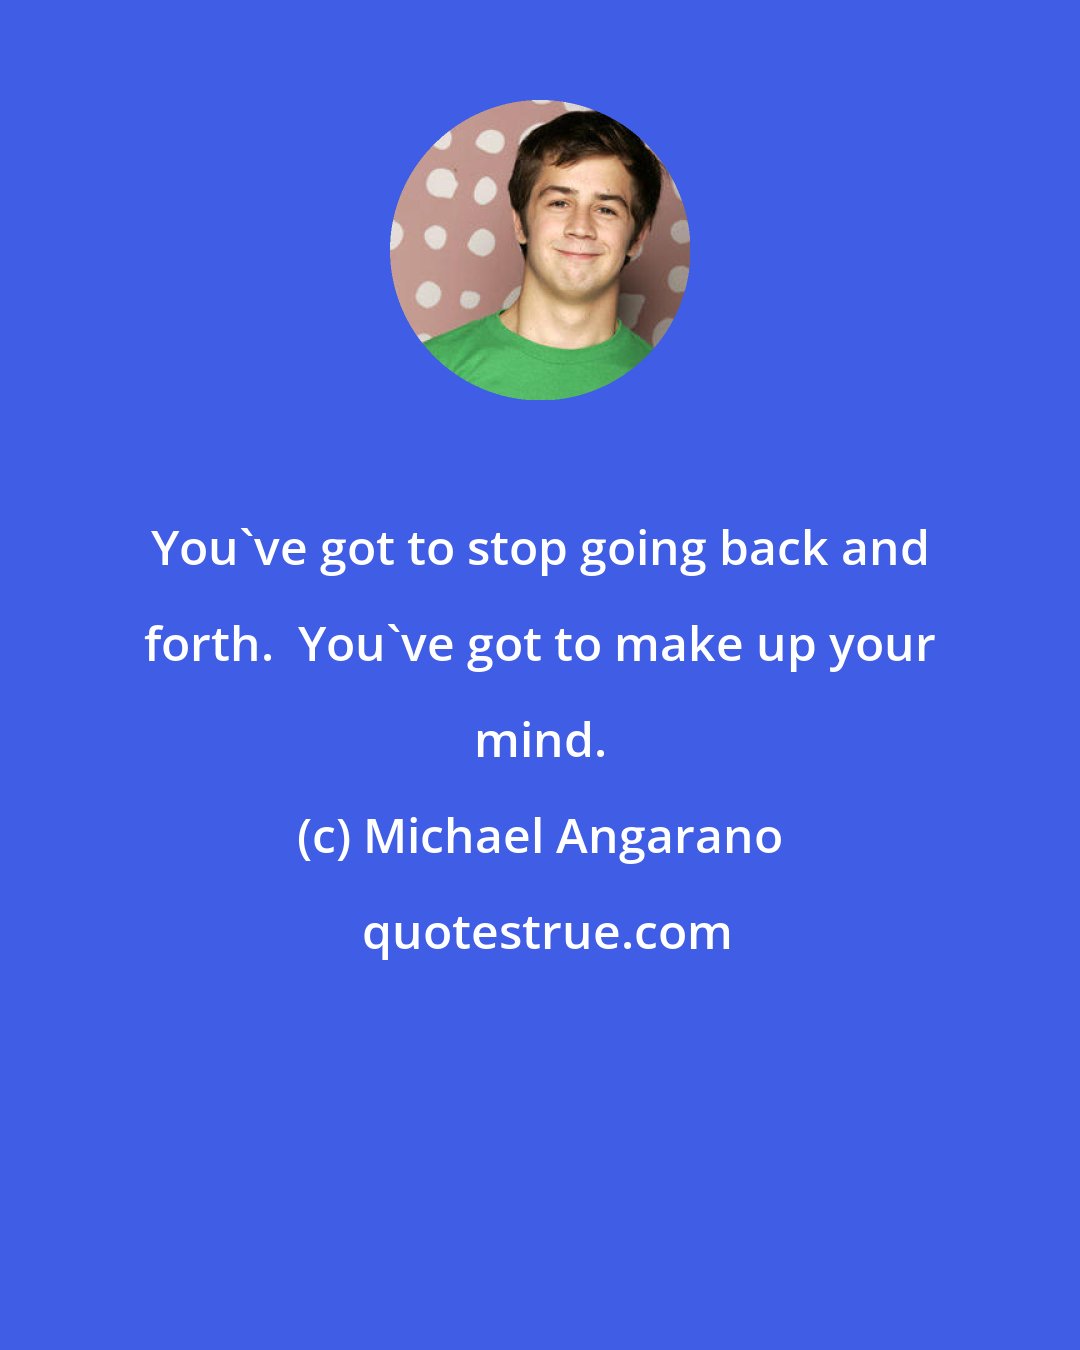 Michael Angarano: You've got to stop going back and forth.  You've got to make up your mind.